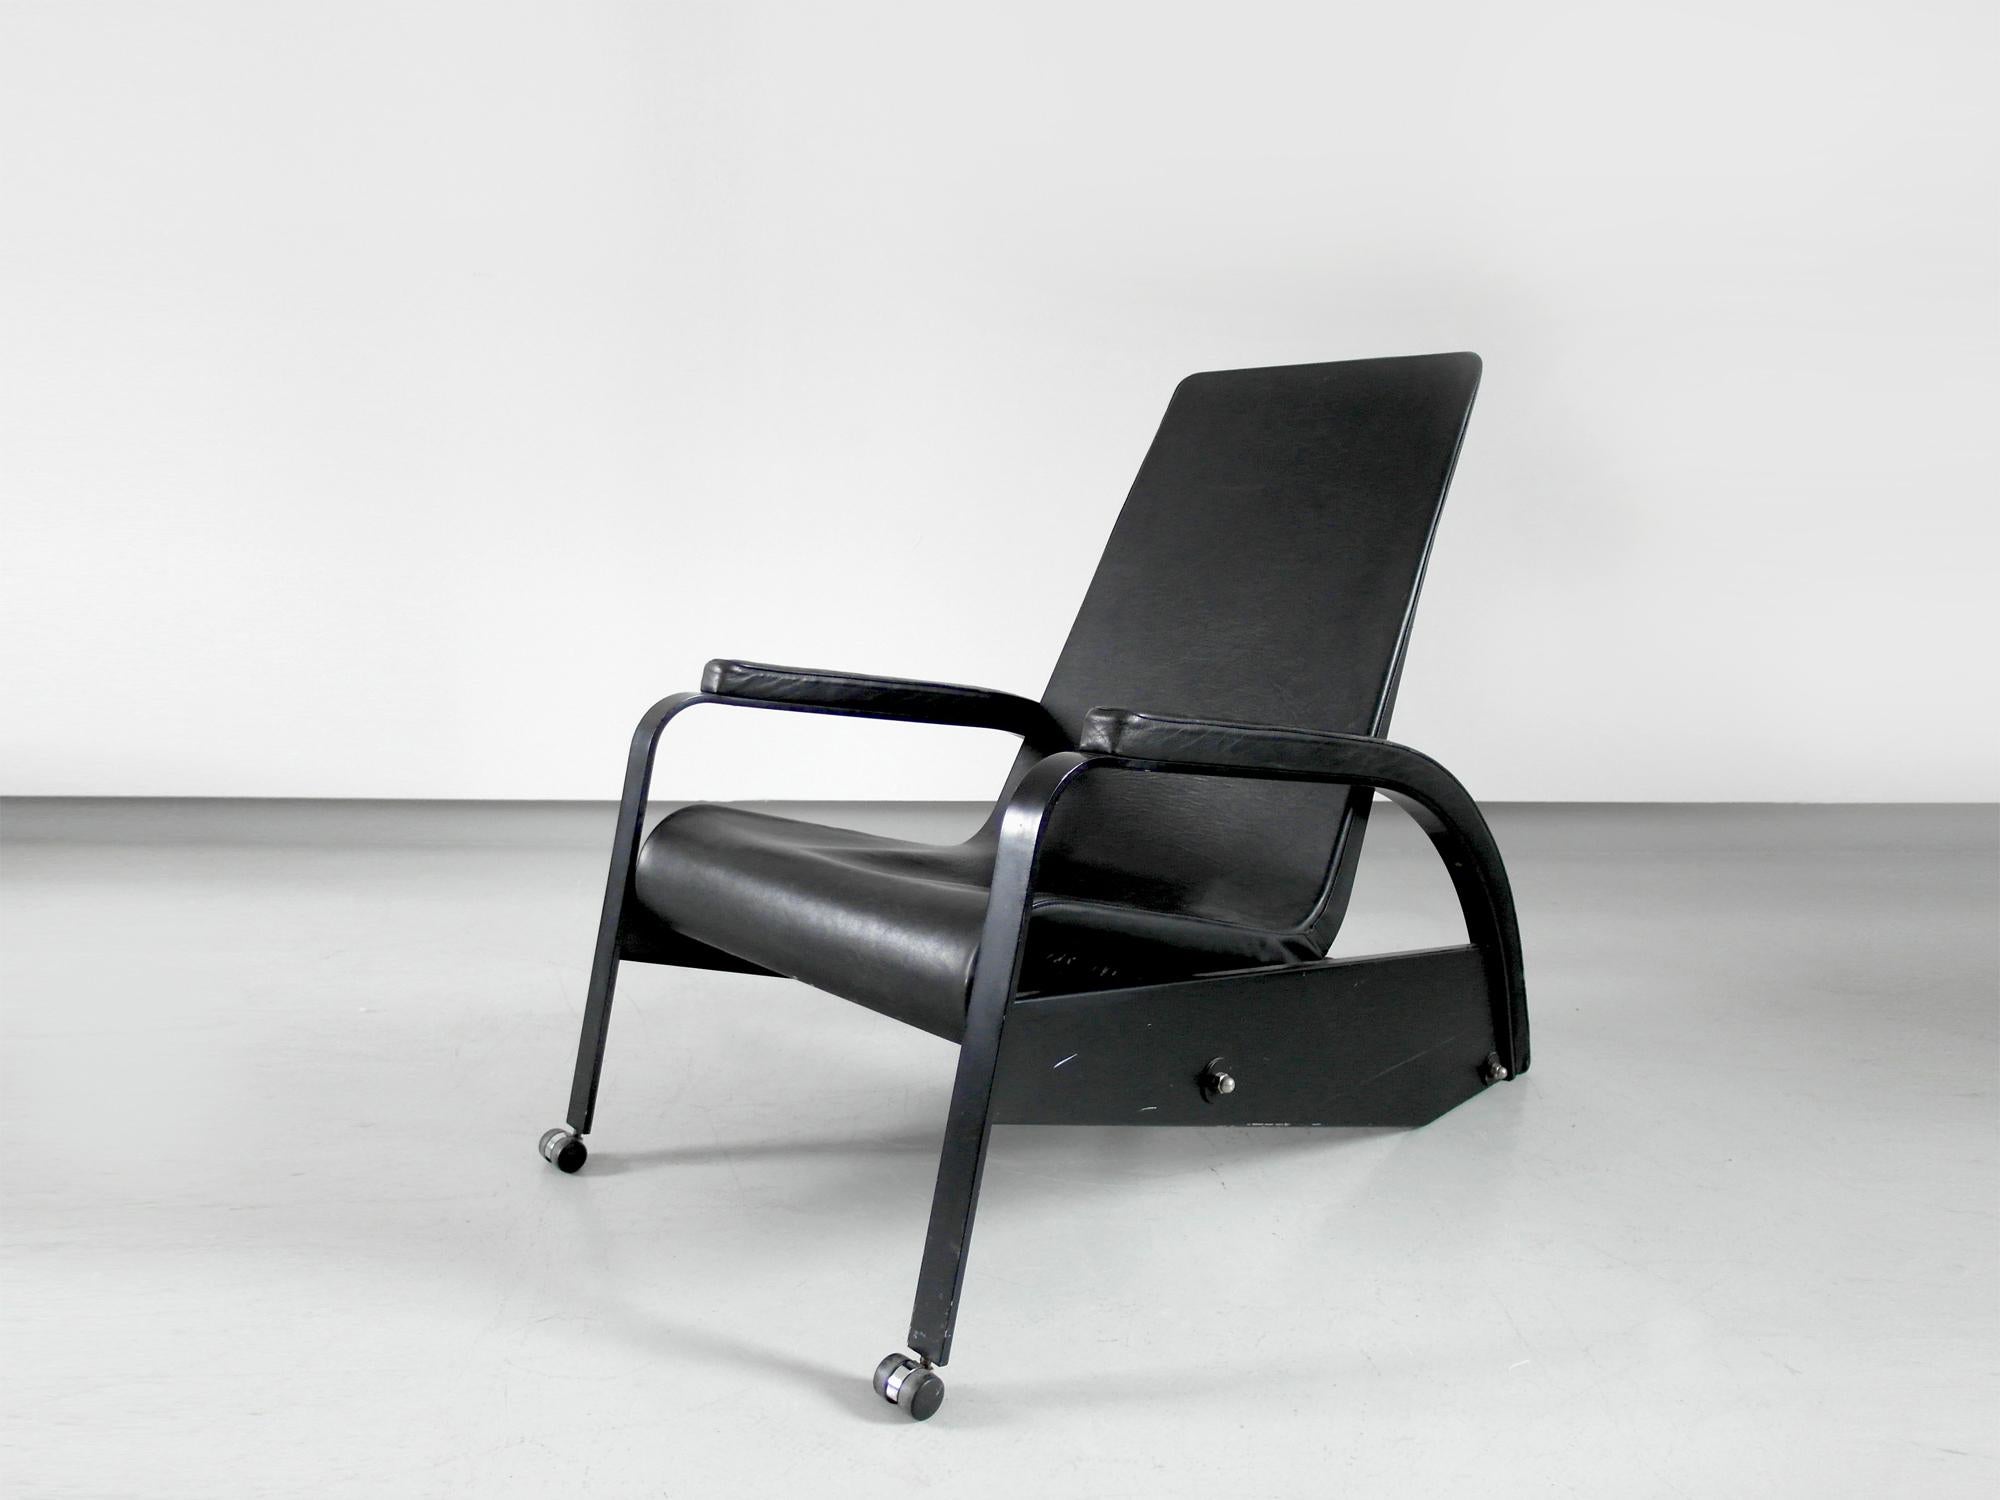 Grand Repos lounge chair designed by Jean Prouvé between 1928 and 1930. Manufactured by Tecta, Germany, 1980s.
Adjustable lounge chair with steel frame, black leather-upholstered sprung seat and armrests, on castors. A hidden spring mechanism